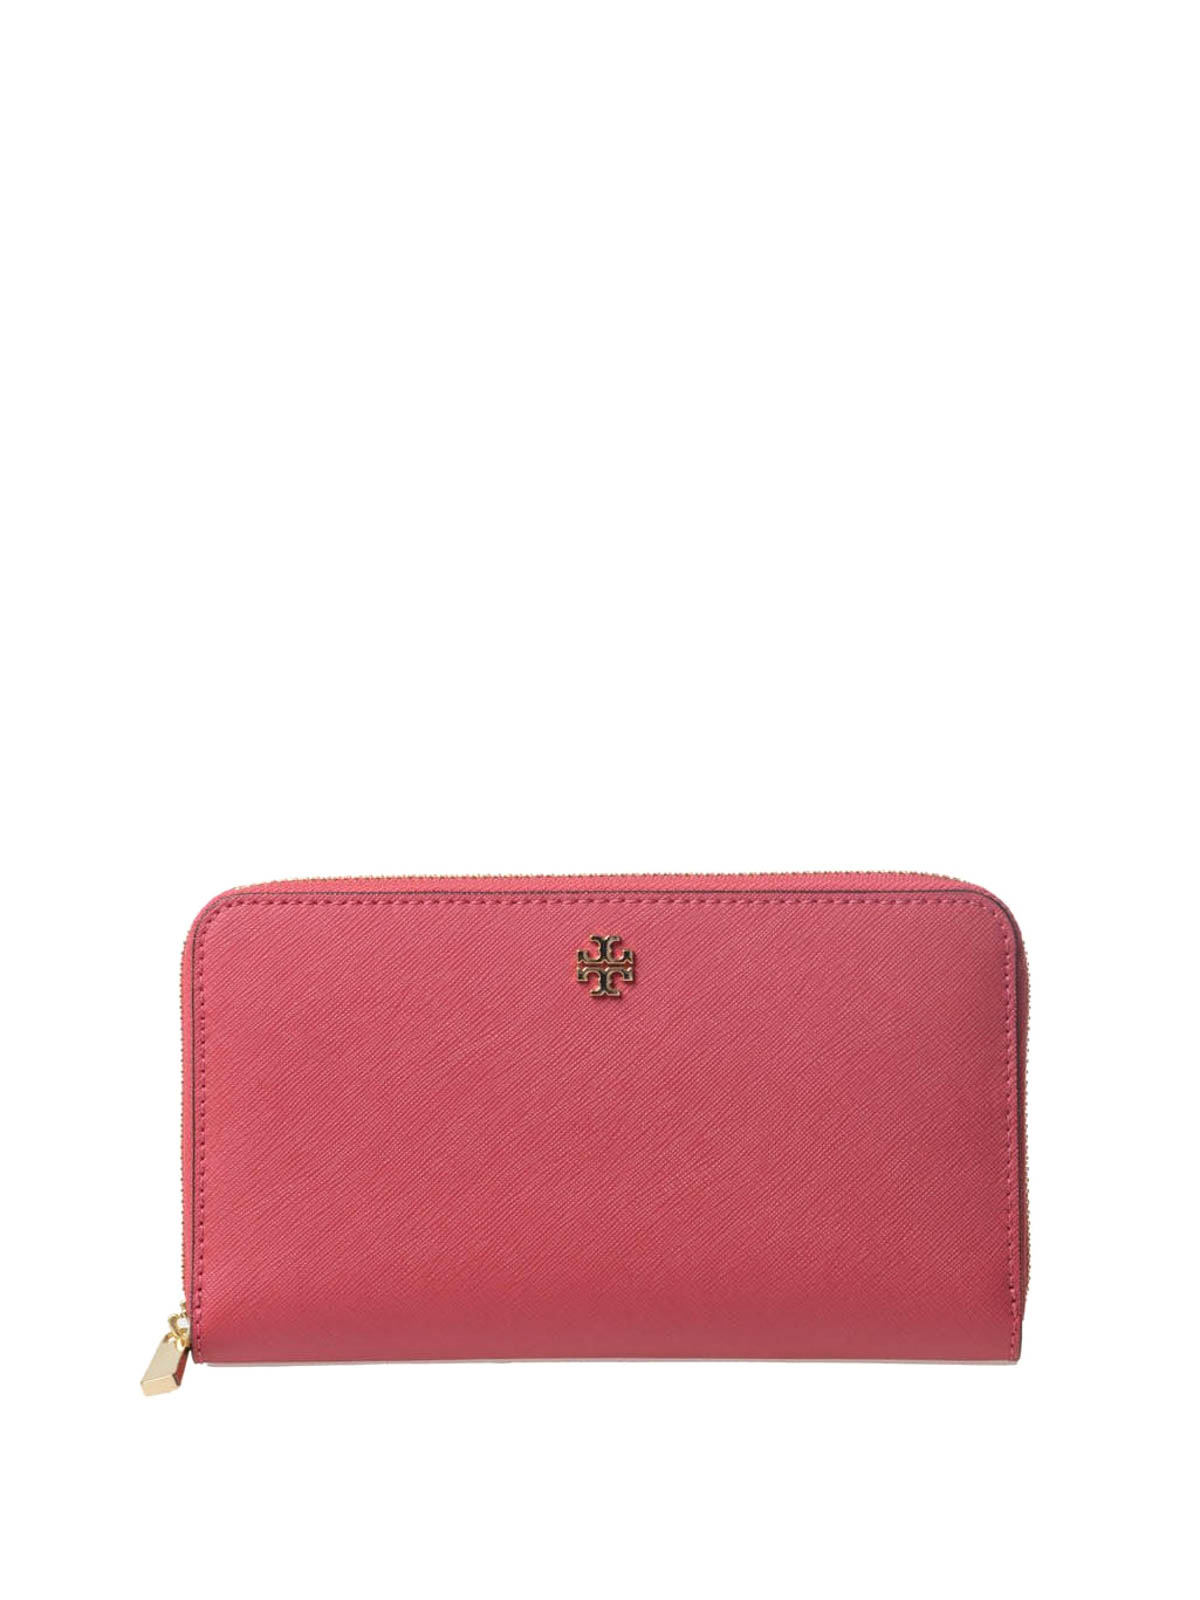 Tory Burch Red Robinson Envelope Continental Wallet